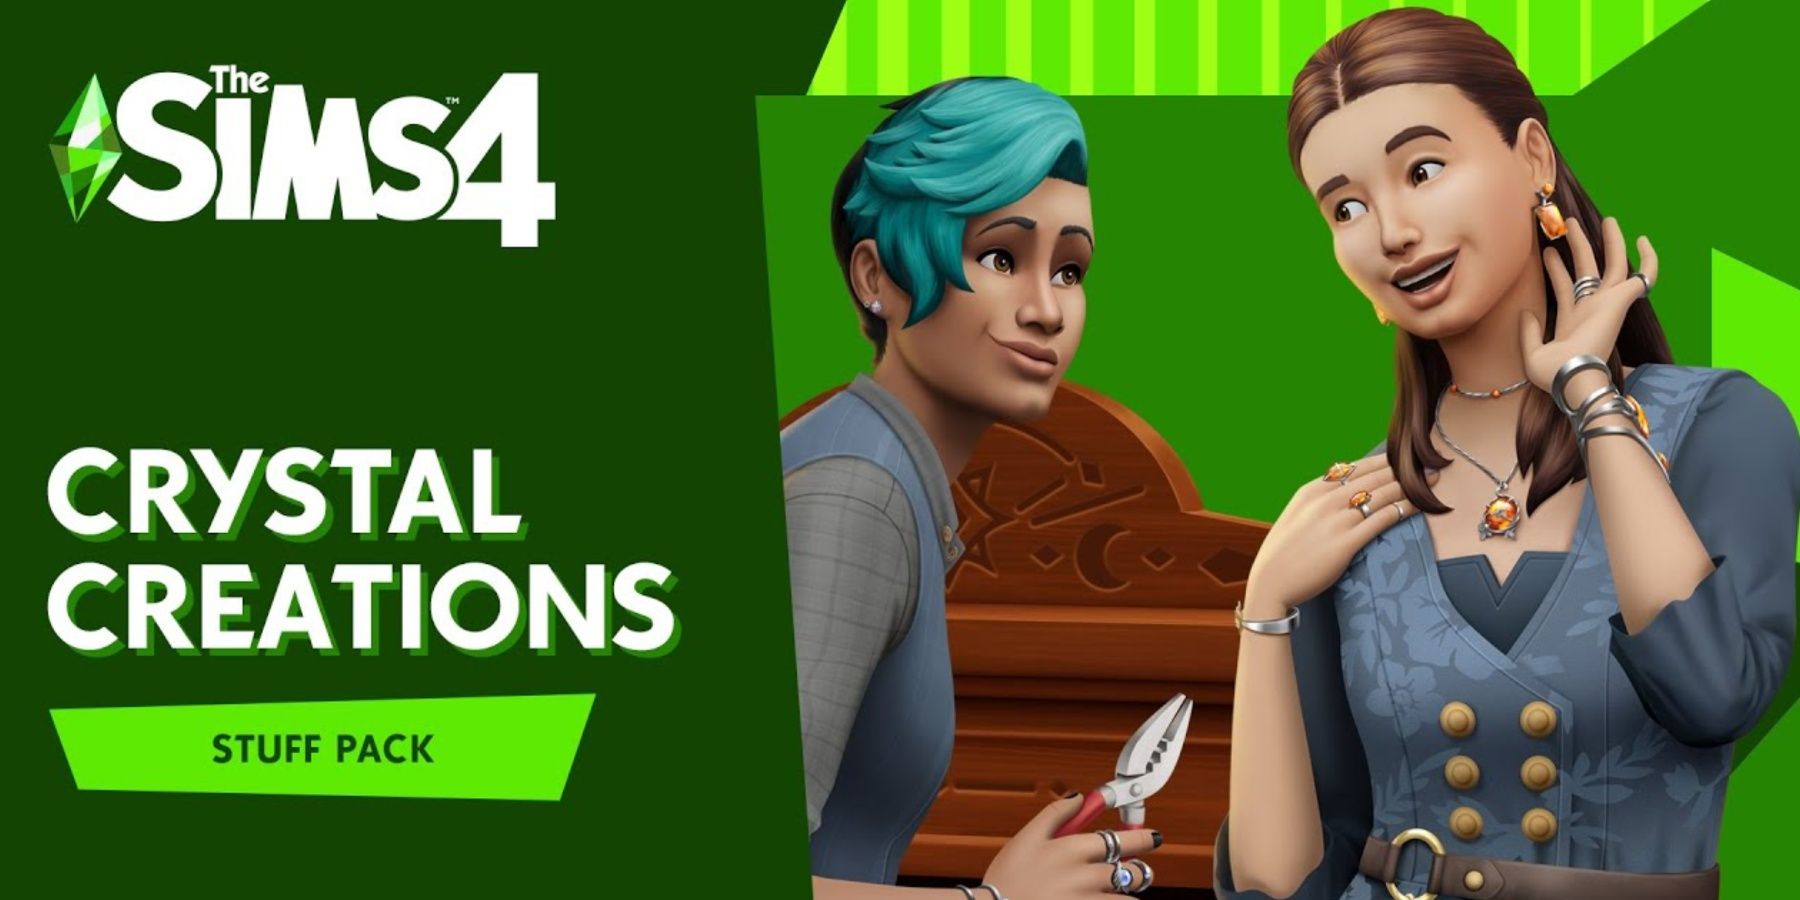 the sims 4: crystal creations stuff pack release date